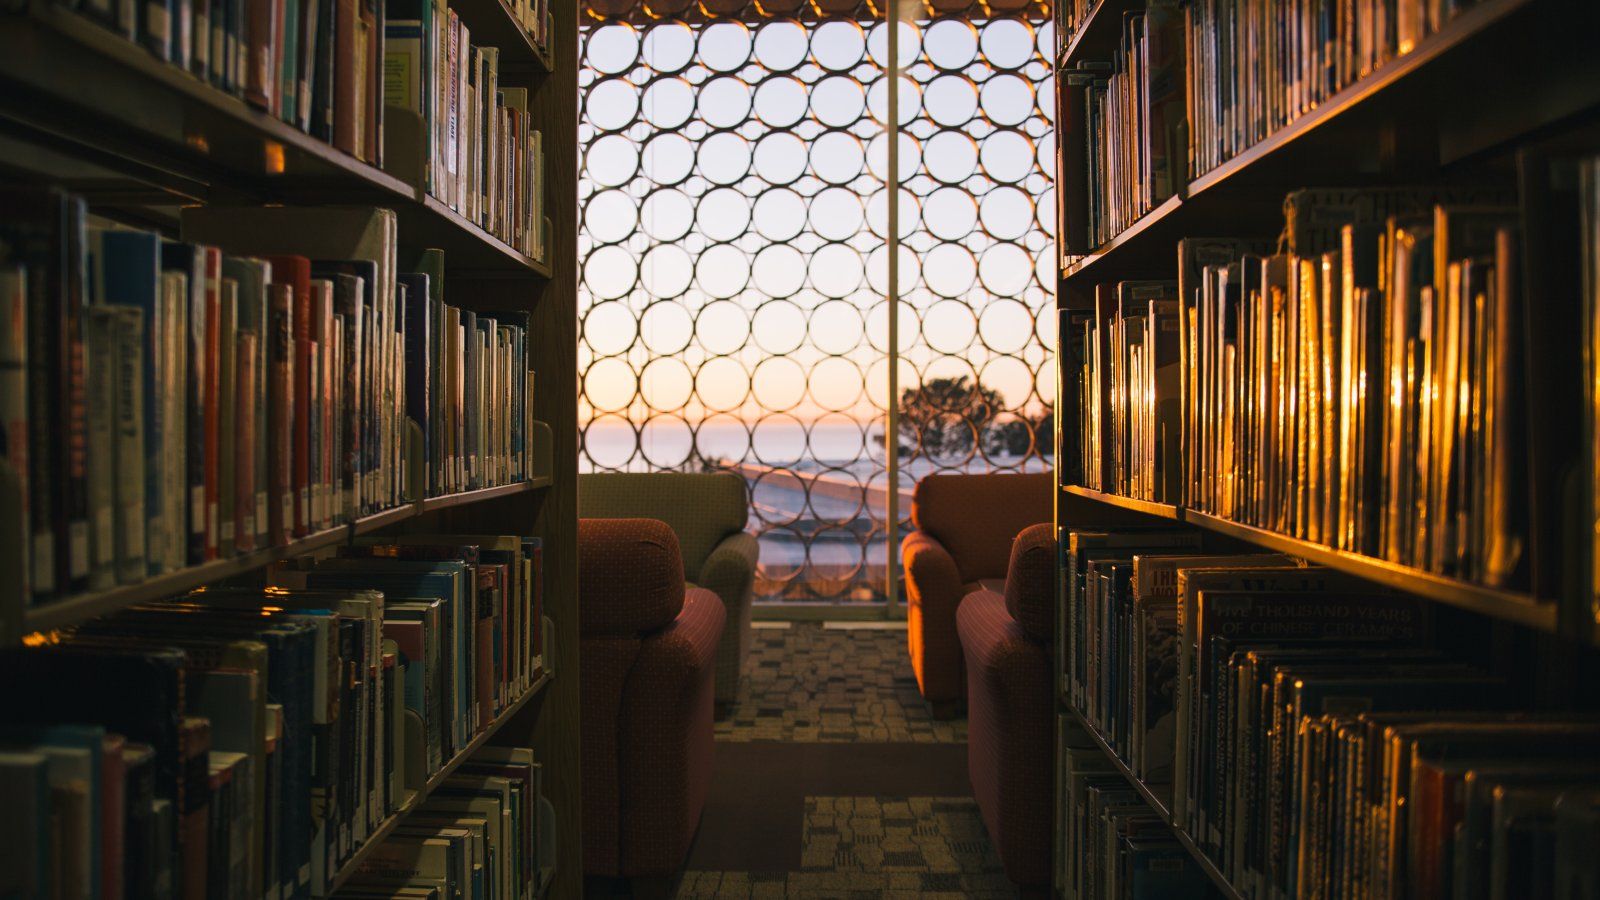 Ryan Library at sunset